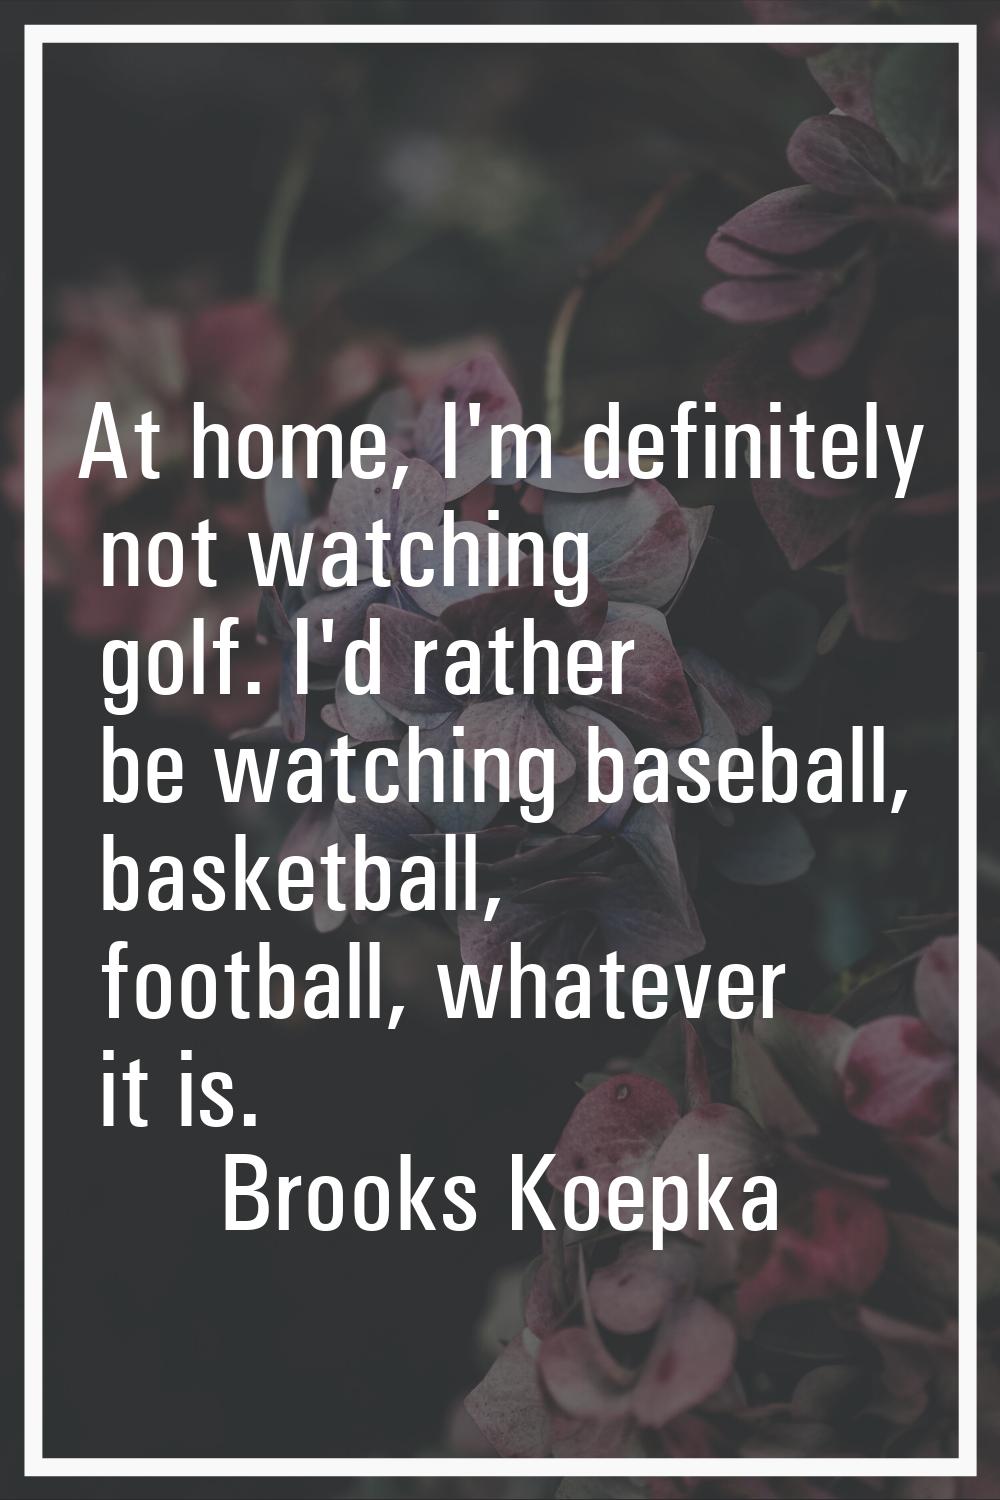 At home, I'm definitely not watching golf. I'd rather be watching baseball, basketball, football, w